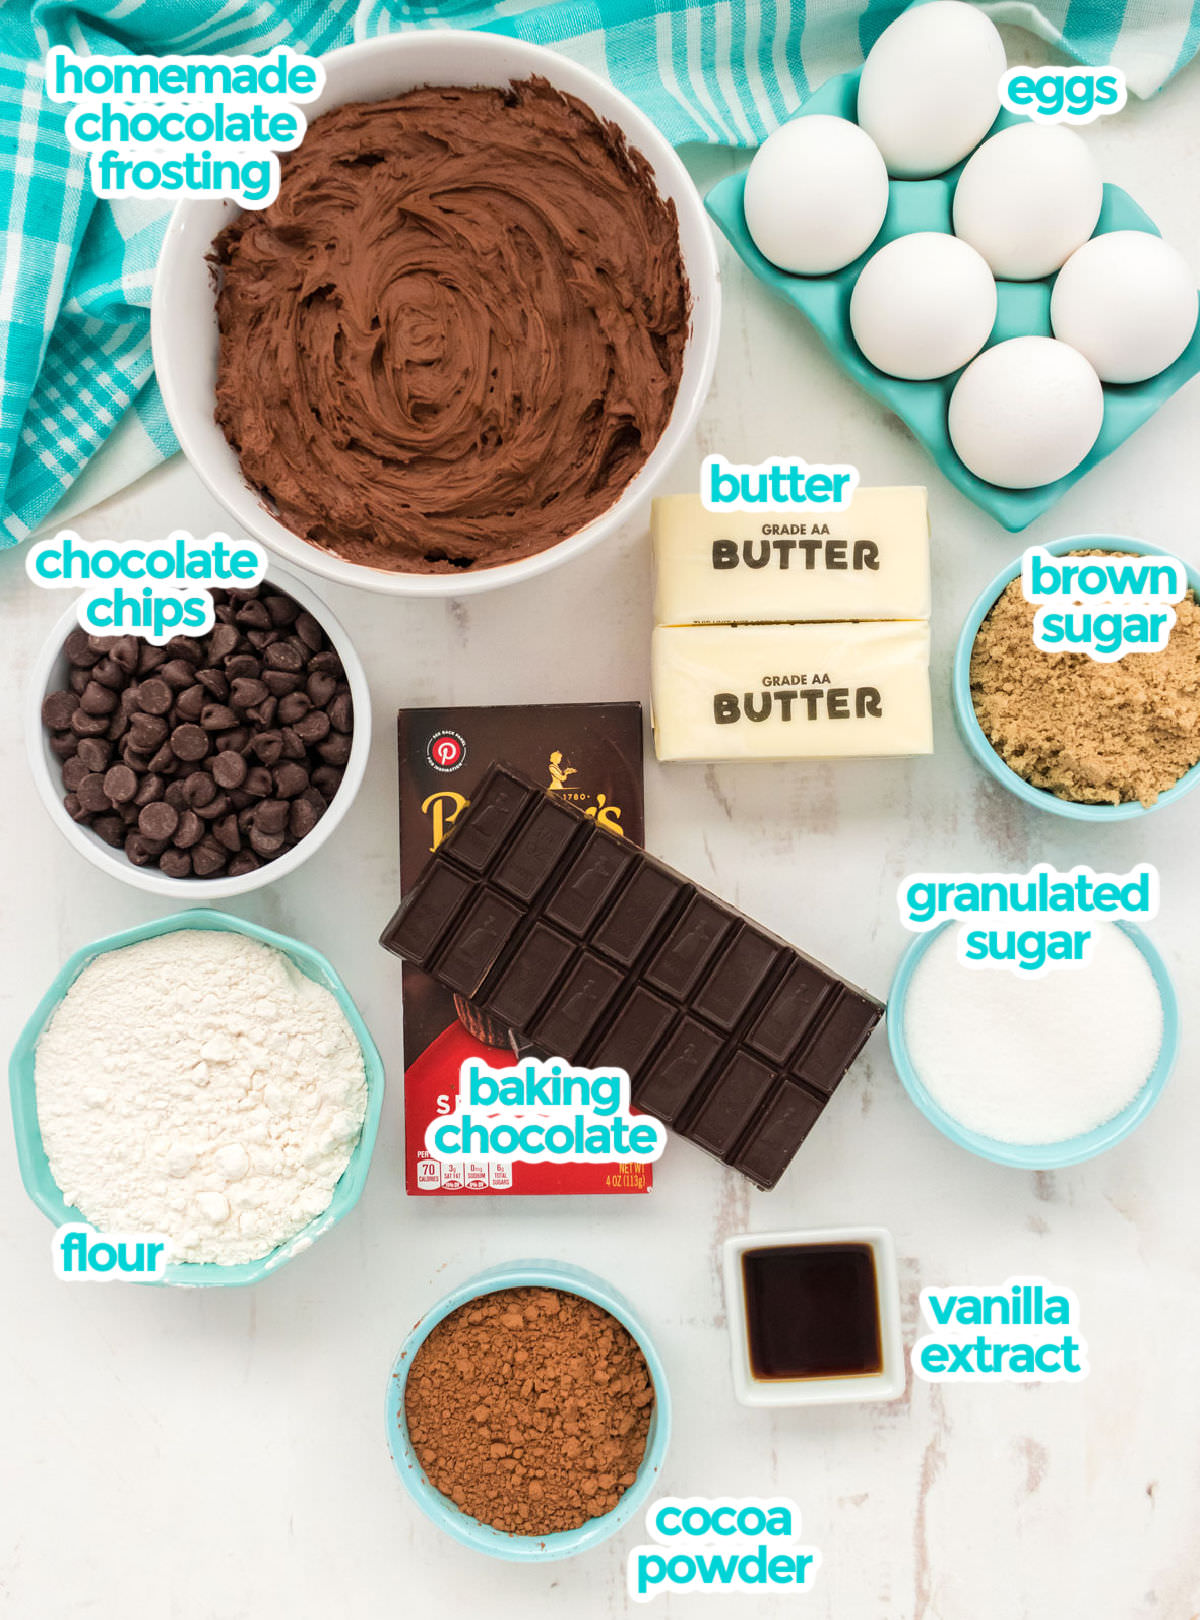 All the ingredients necessary to make Frosted Brownies including Chocolate Frosting, eggs, brown sugar, granulated sugar, butter, chocolate chips, baking chocolate, flour, cocoa powder and vanilla extract.